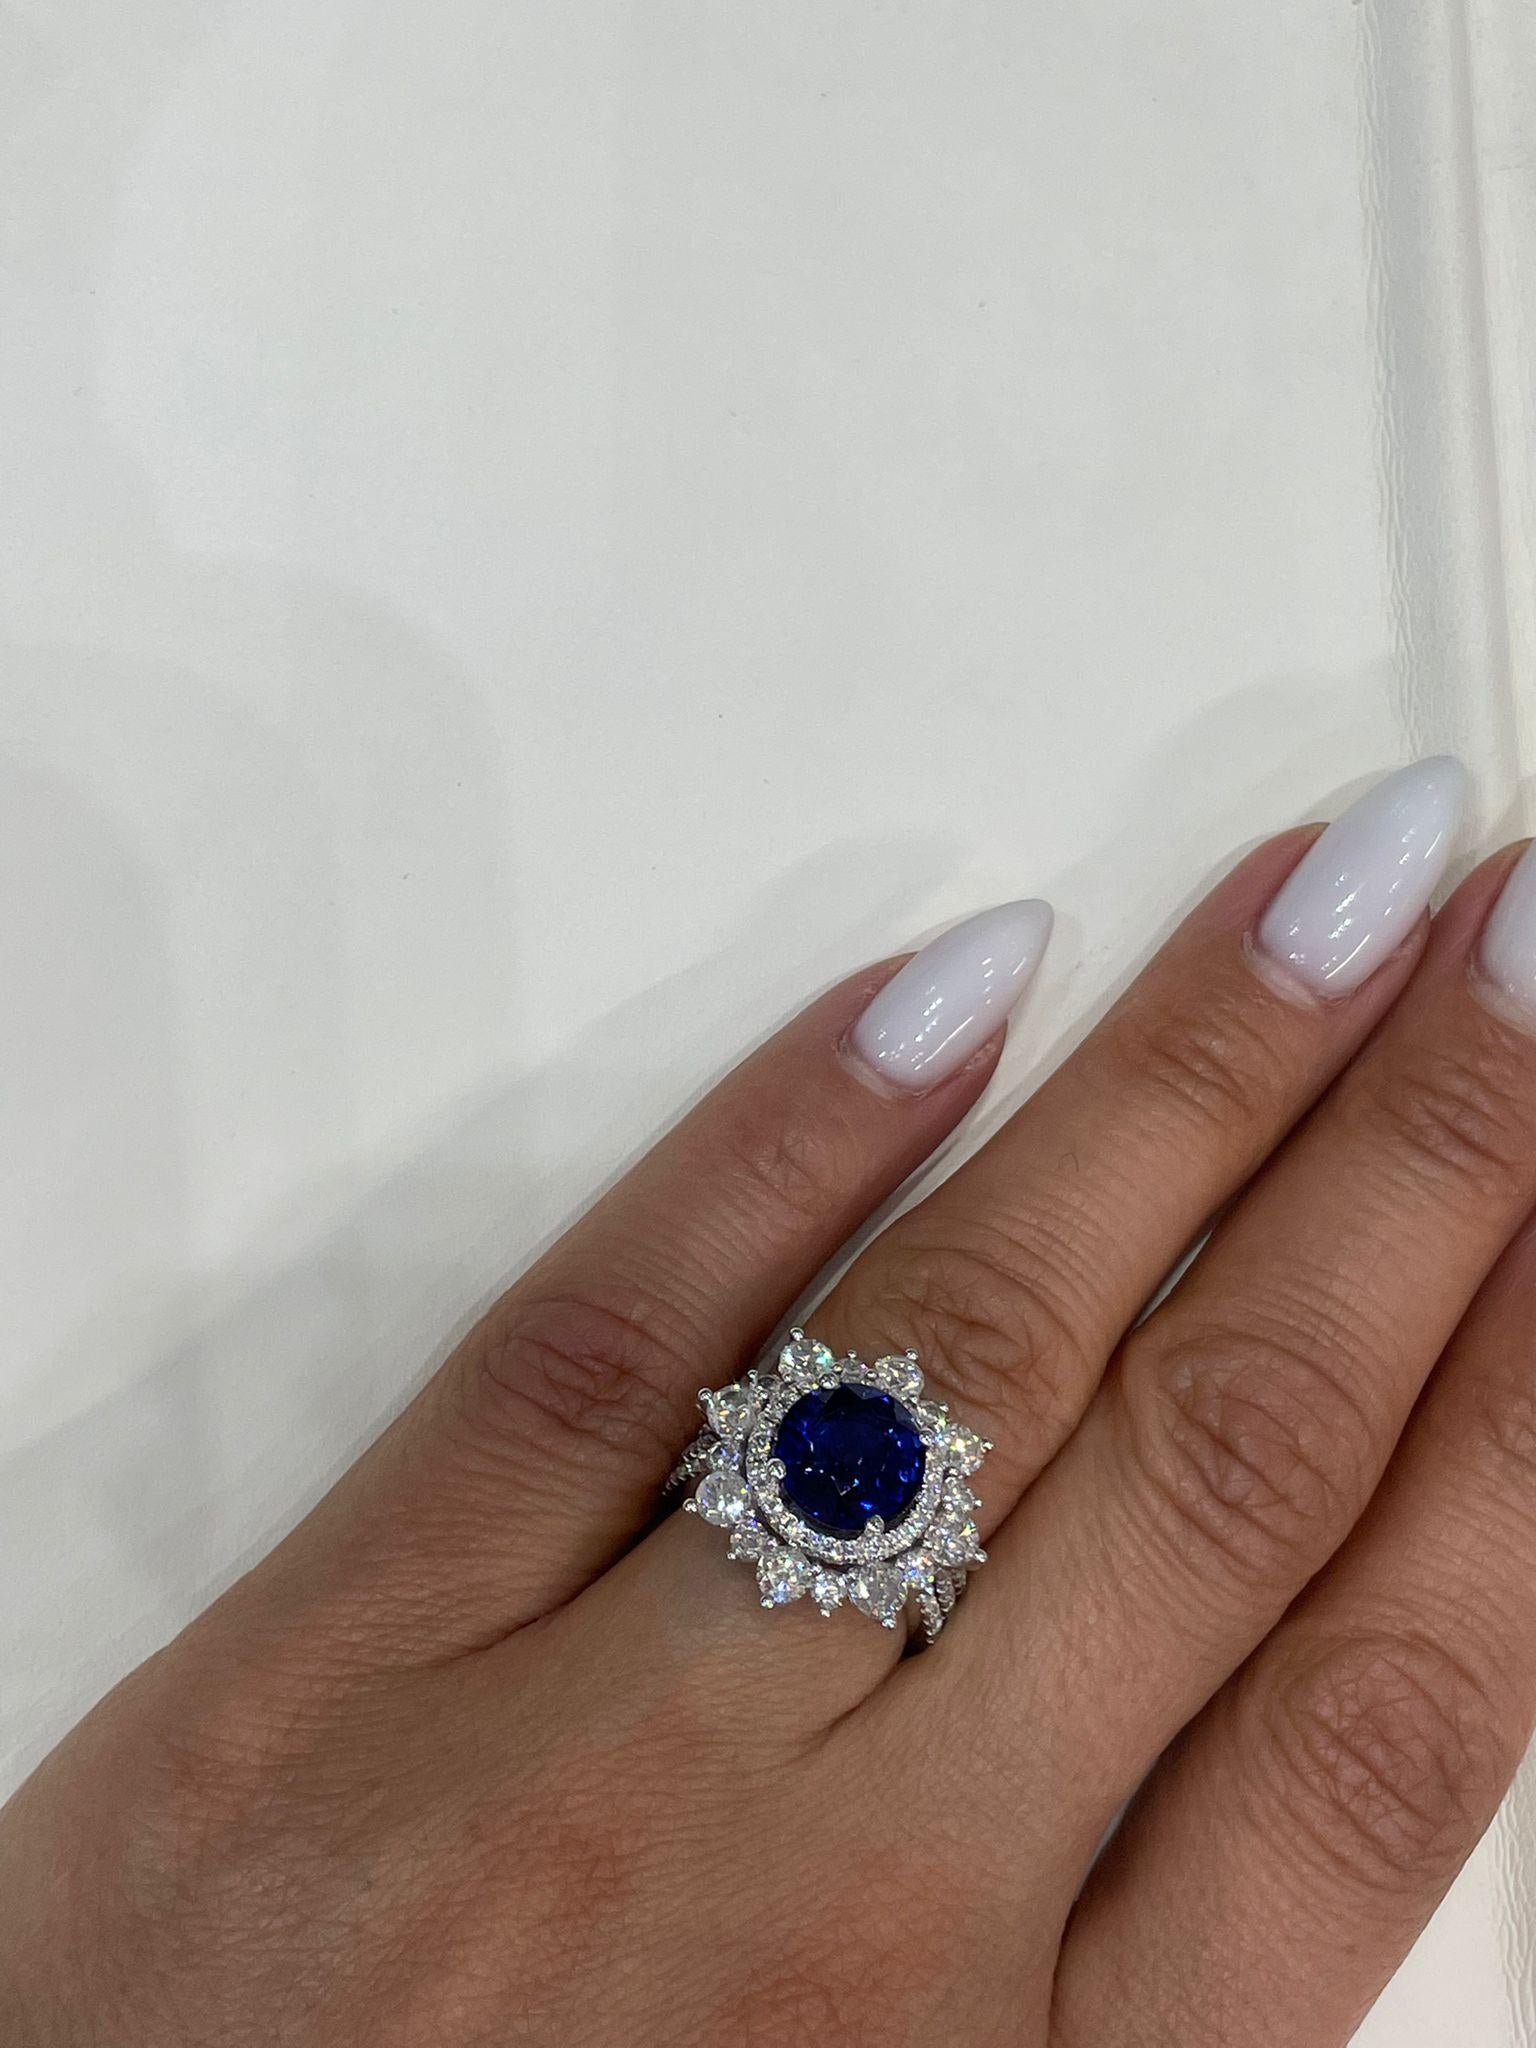 Round Cut 7 Carat Round Brilliant Blue Sapphire Ring Certified For Sale